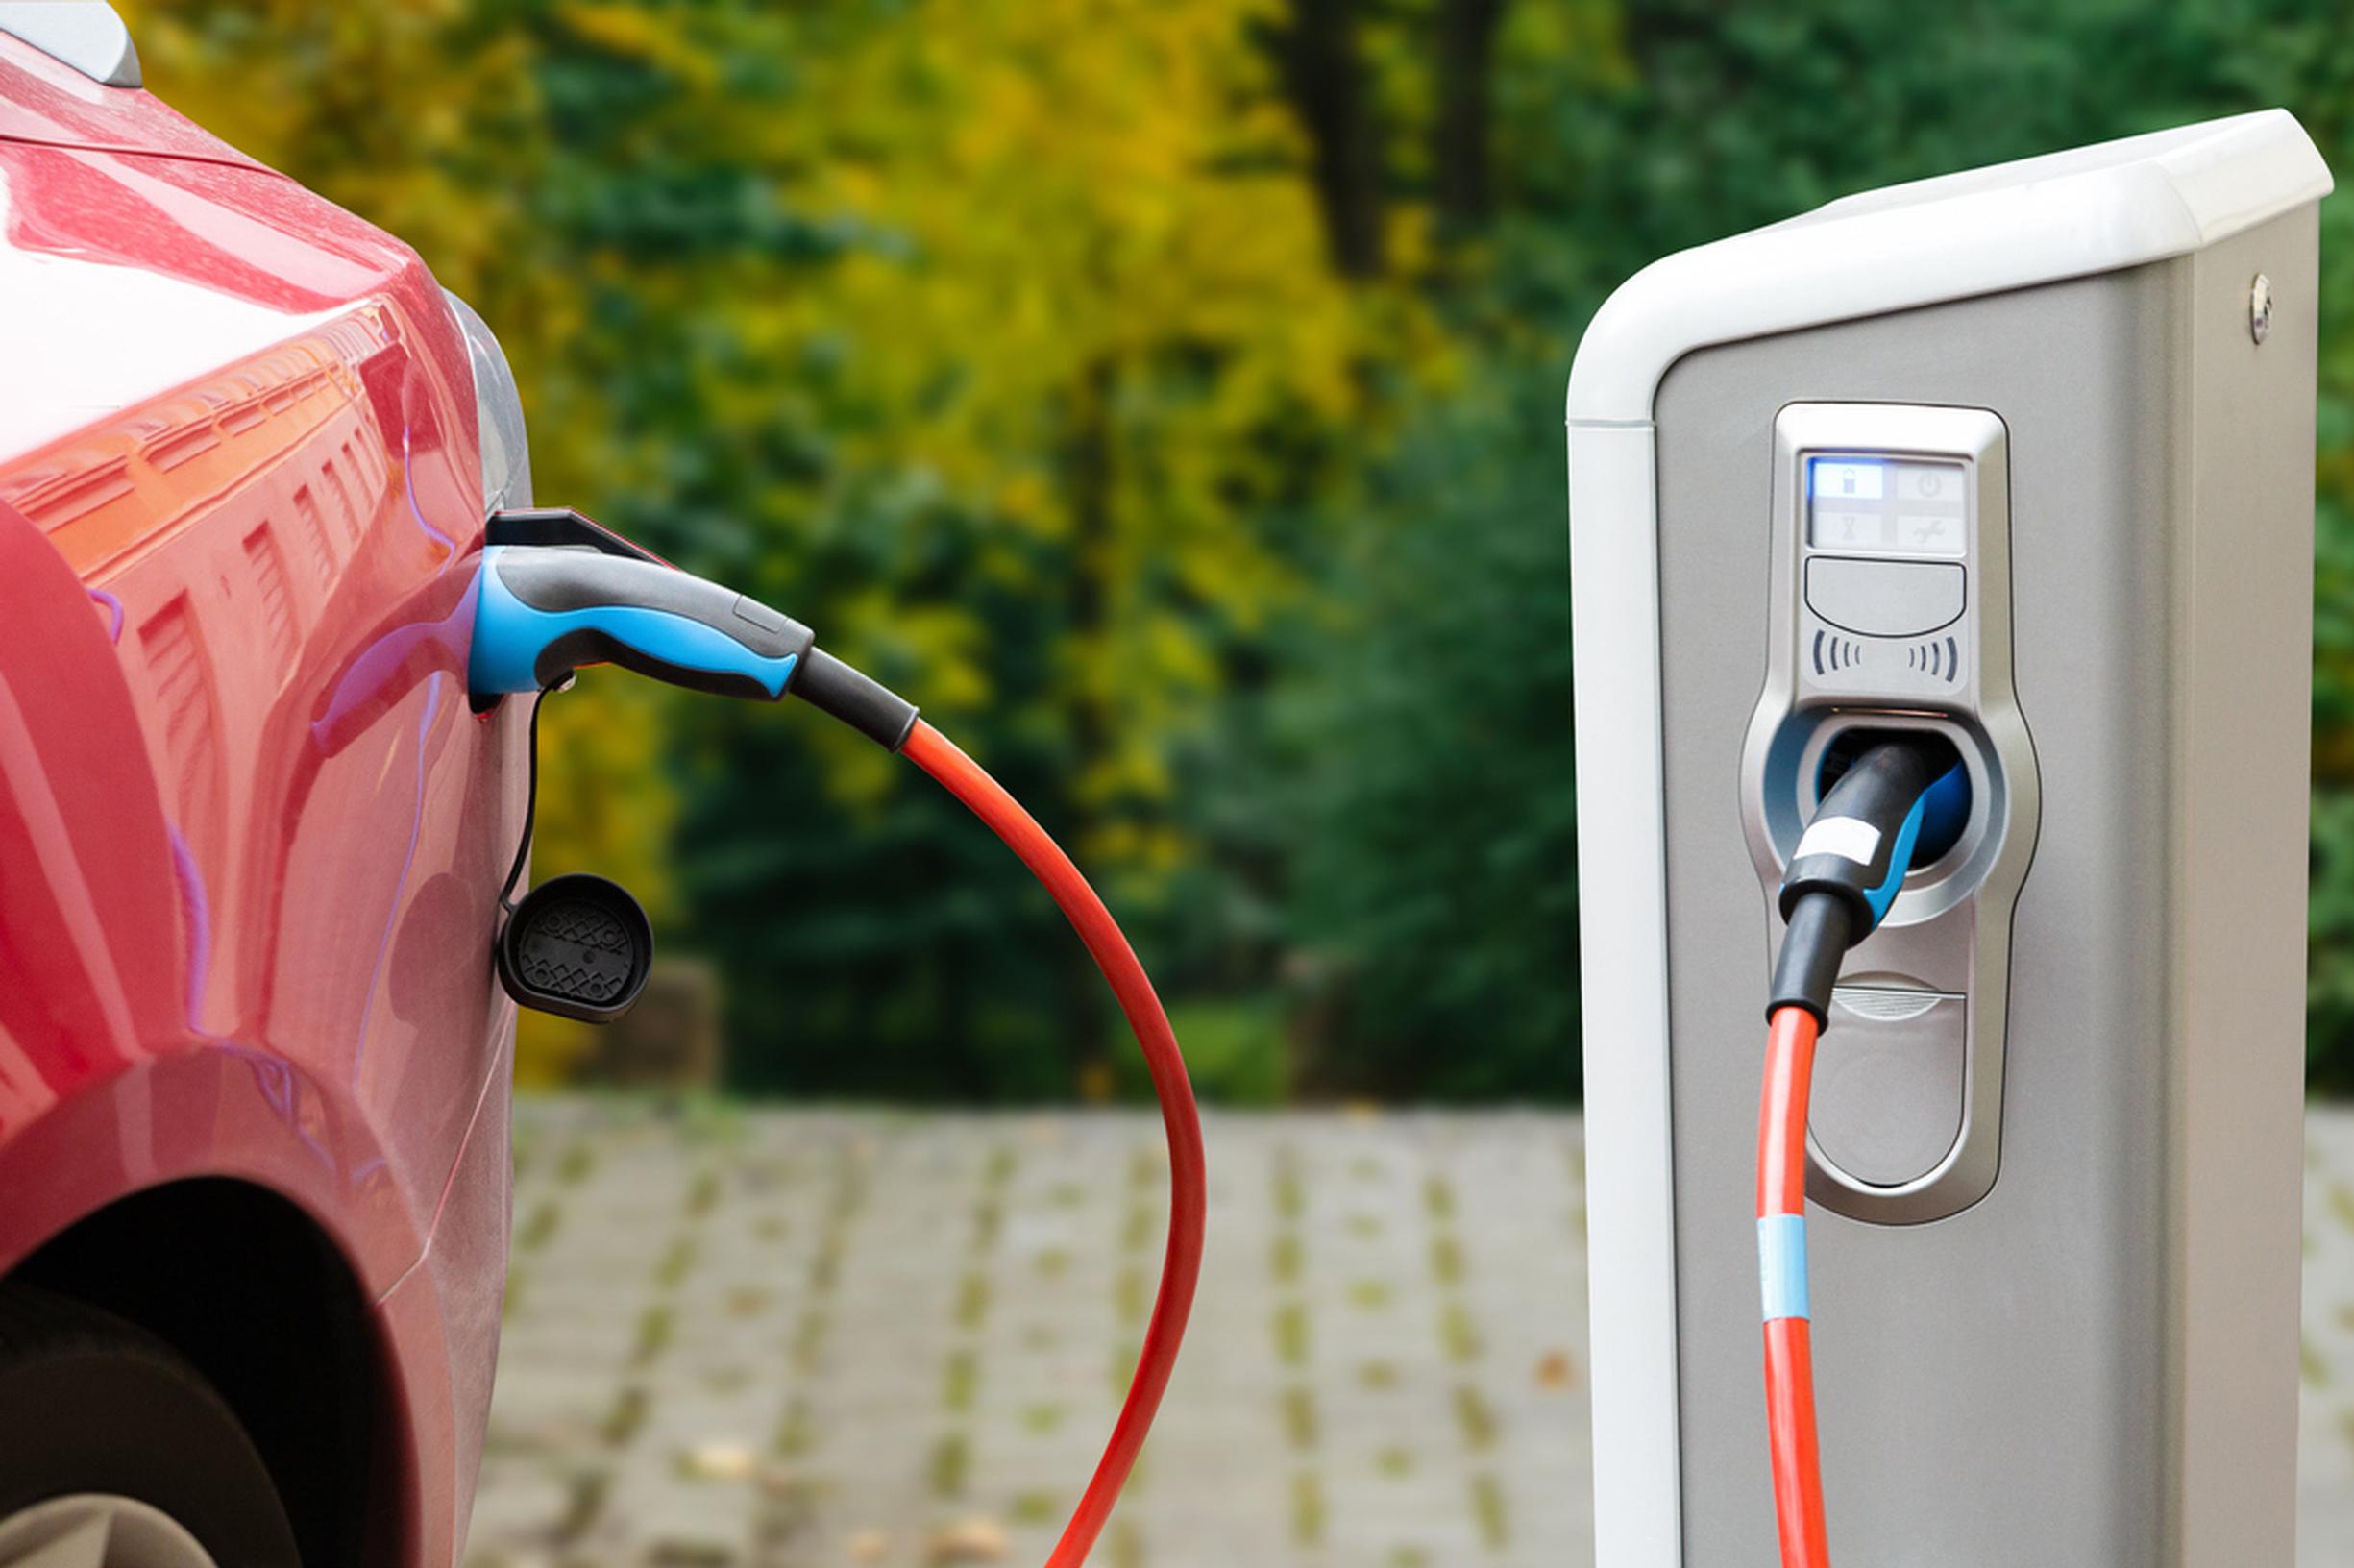 EV charging at home is substantially cheaper than on-street